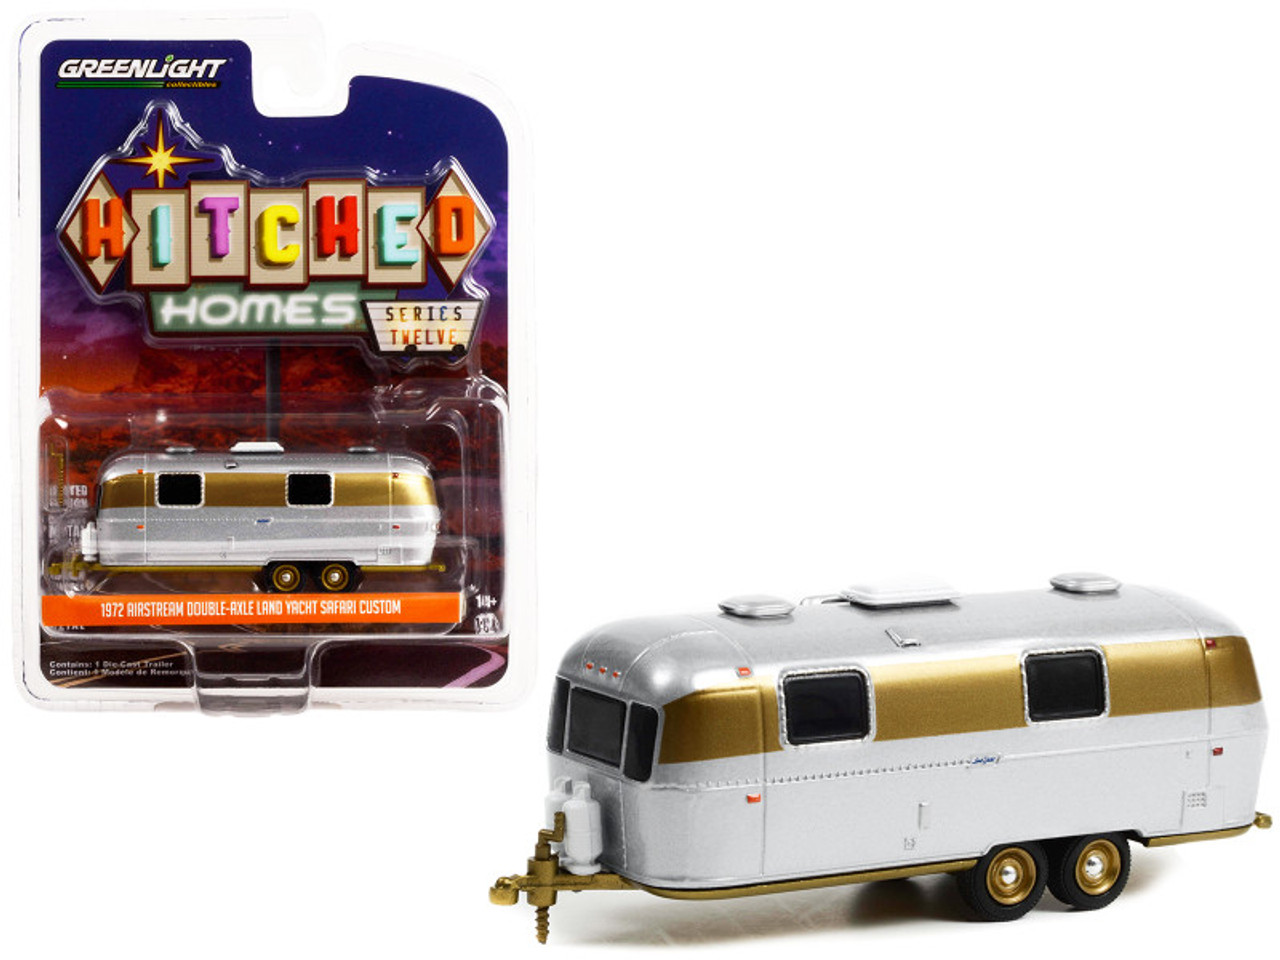 1972 Airstream Double-Axle Land Yacht Safari Custom Travel Trailer Chrome and Gold "Hitched Homes" Series 12 1/64 Diecast Model by Greenlight